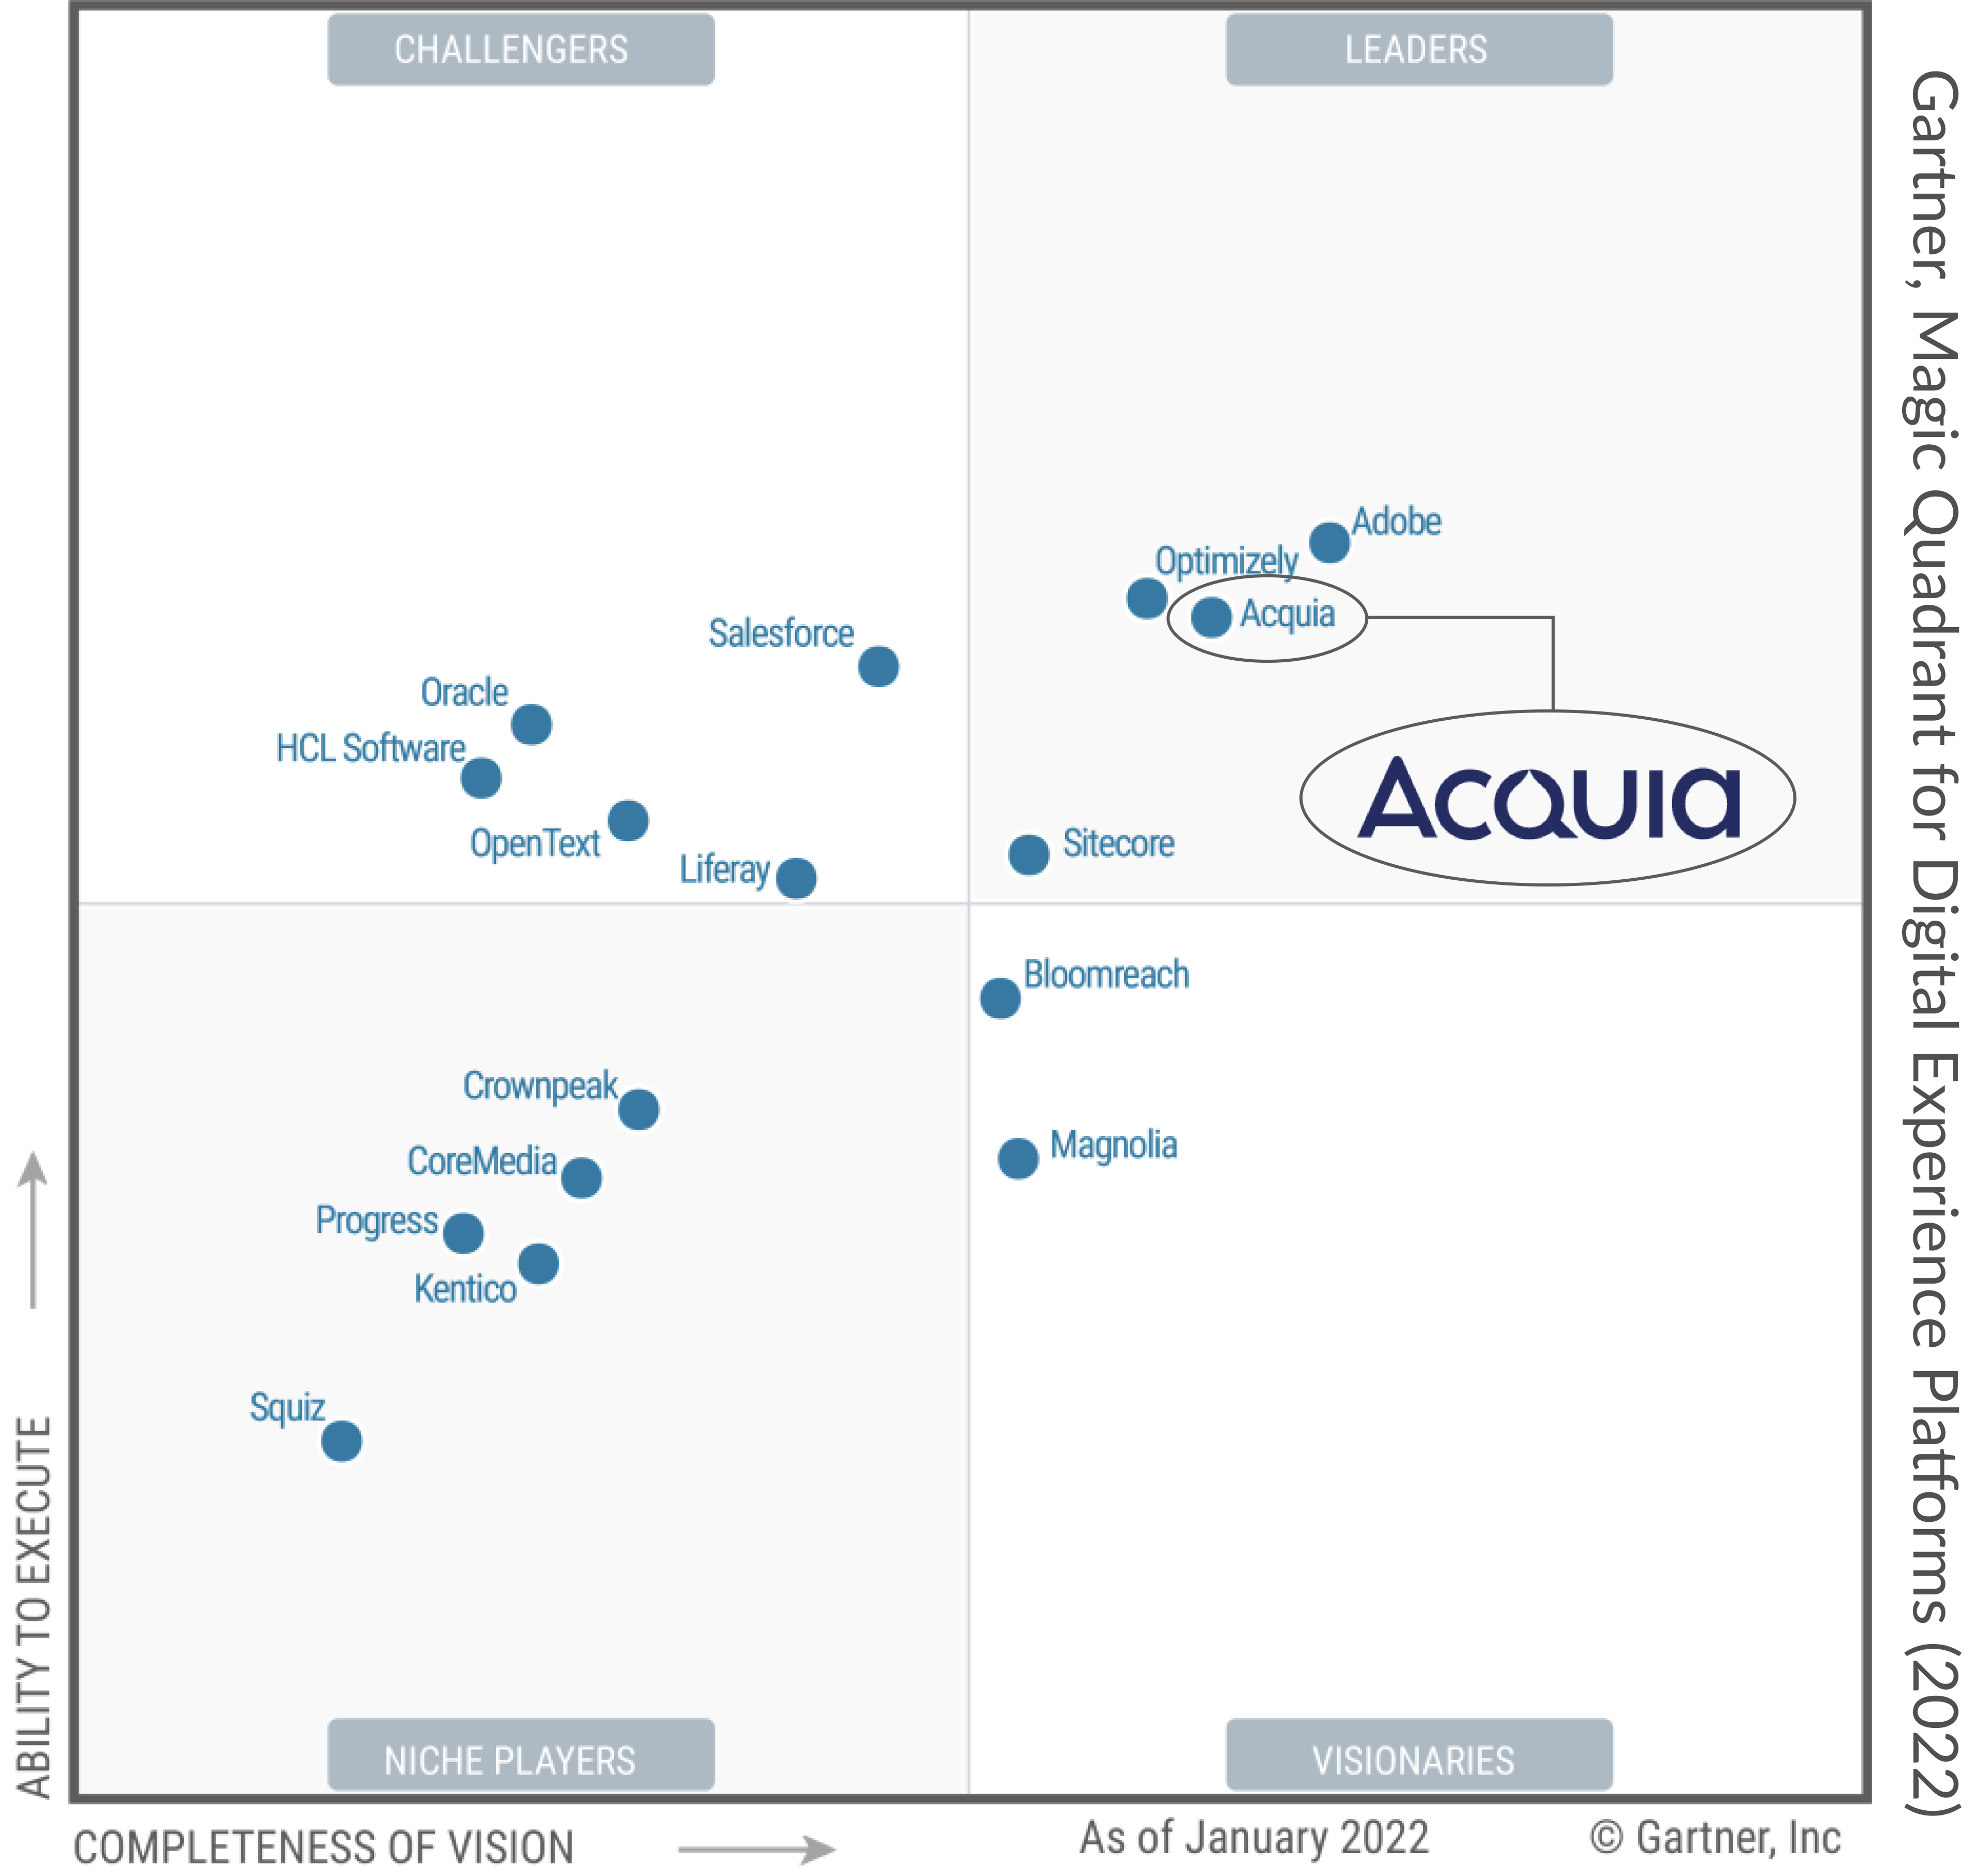 Acquia was named a Leader in the Gartner Magic Quadrant for Digital Experience Platforms in 2022